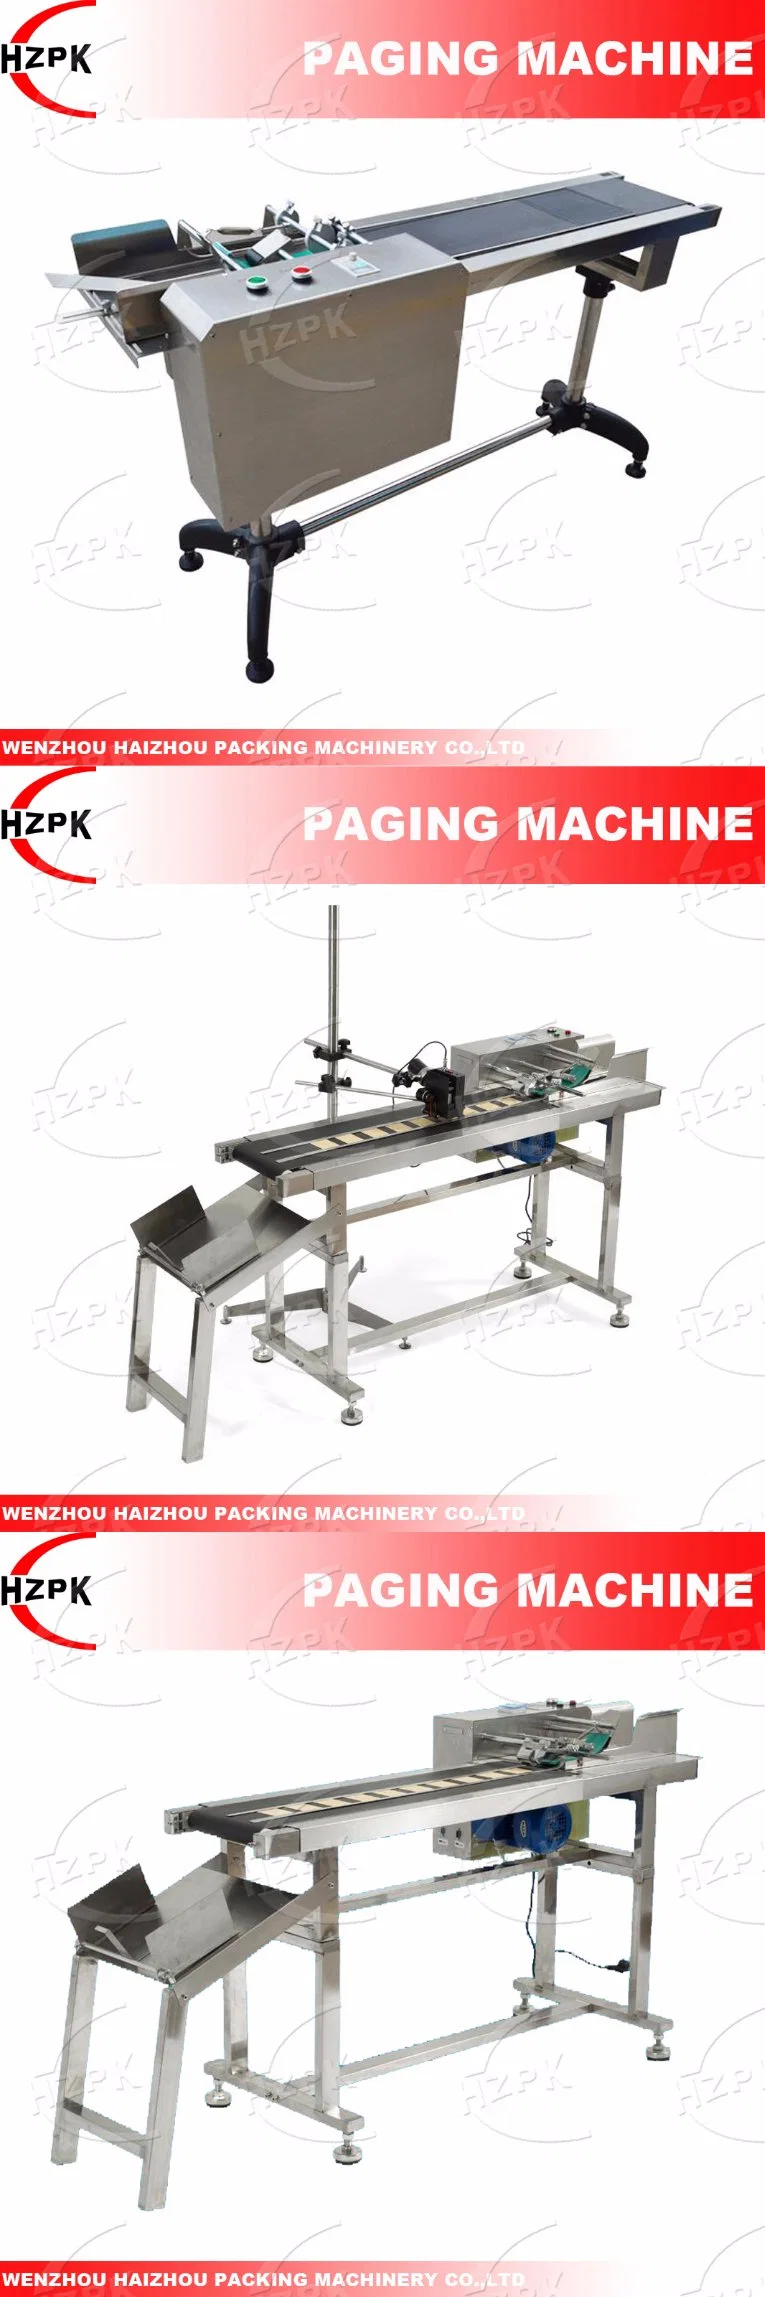 Paging Machine for Seperating Paper, Plastic Bag, ID Card